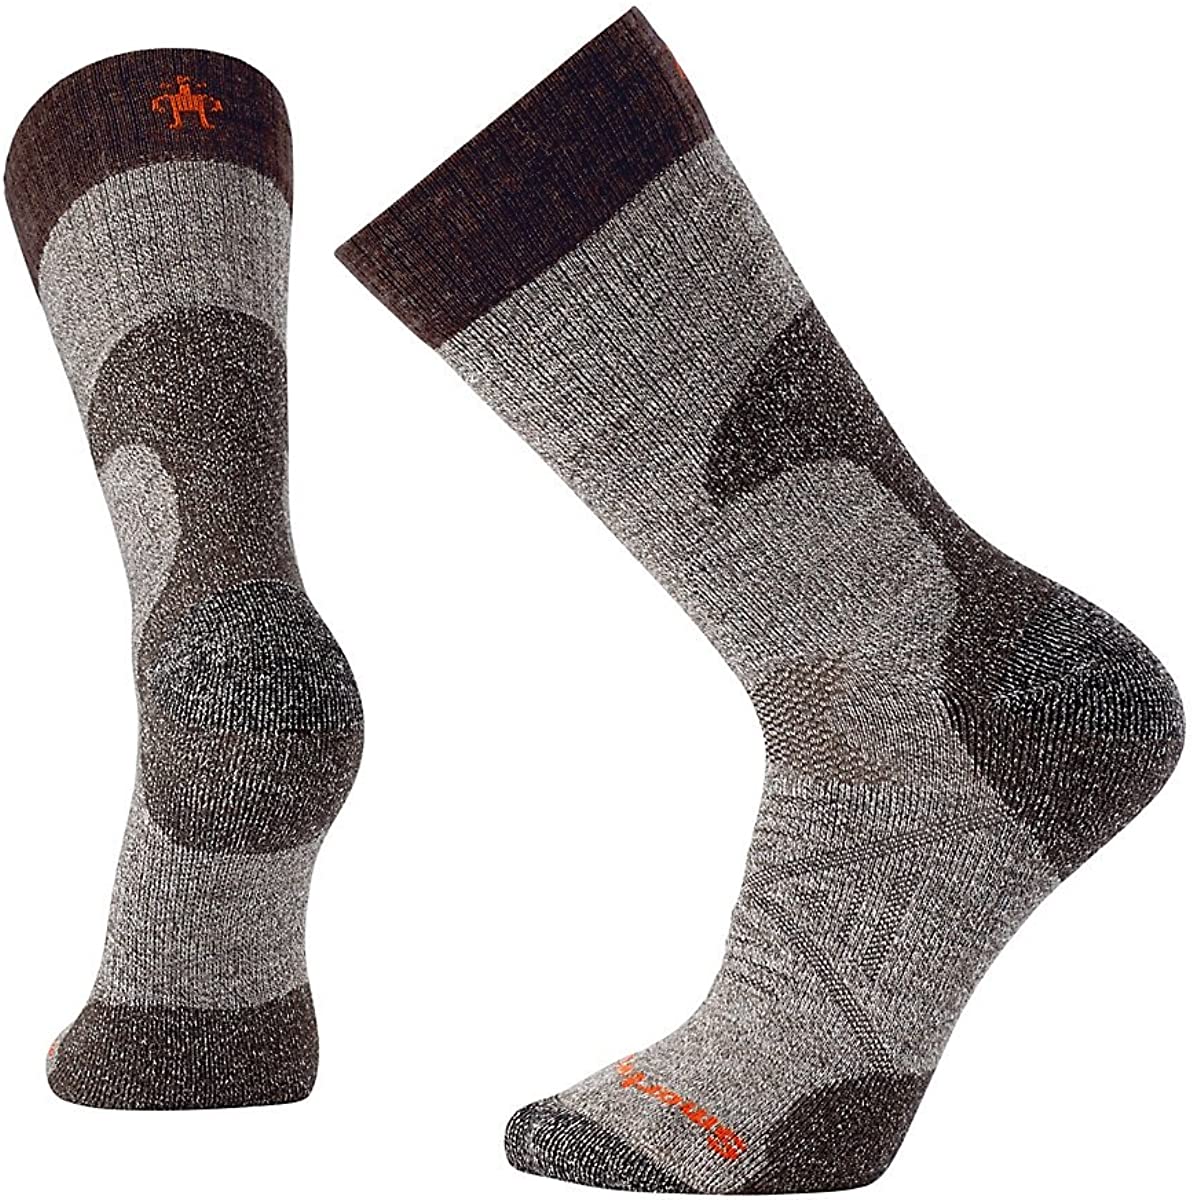 Unisex Smartwool PhD Hunting Medium Crew Socks in Taupe from the front view